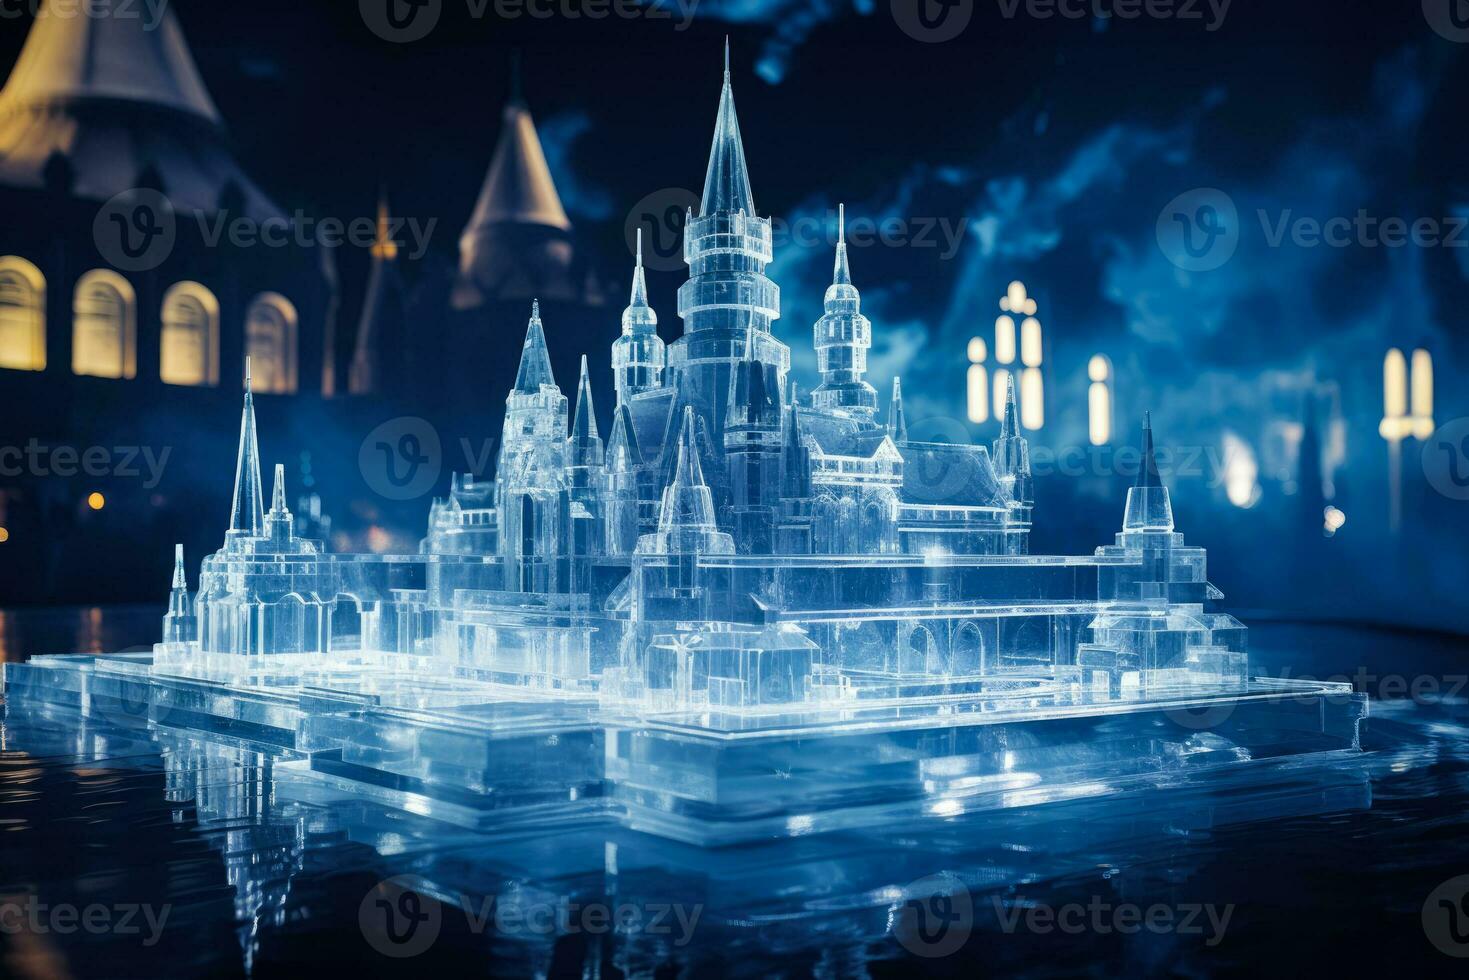 Laser guided technology aiding the creation of a precision crafted grand icy castle photo